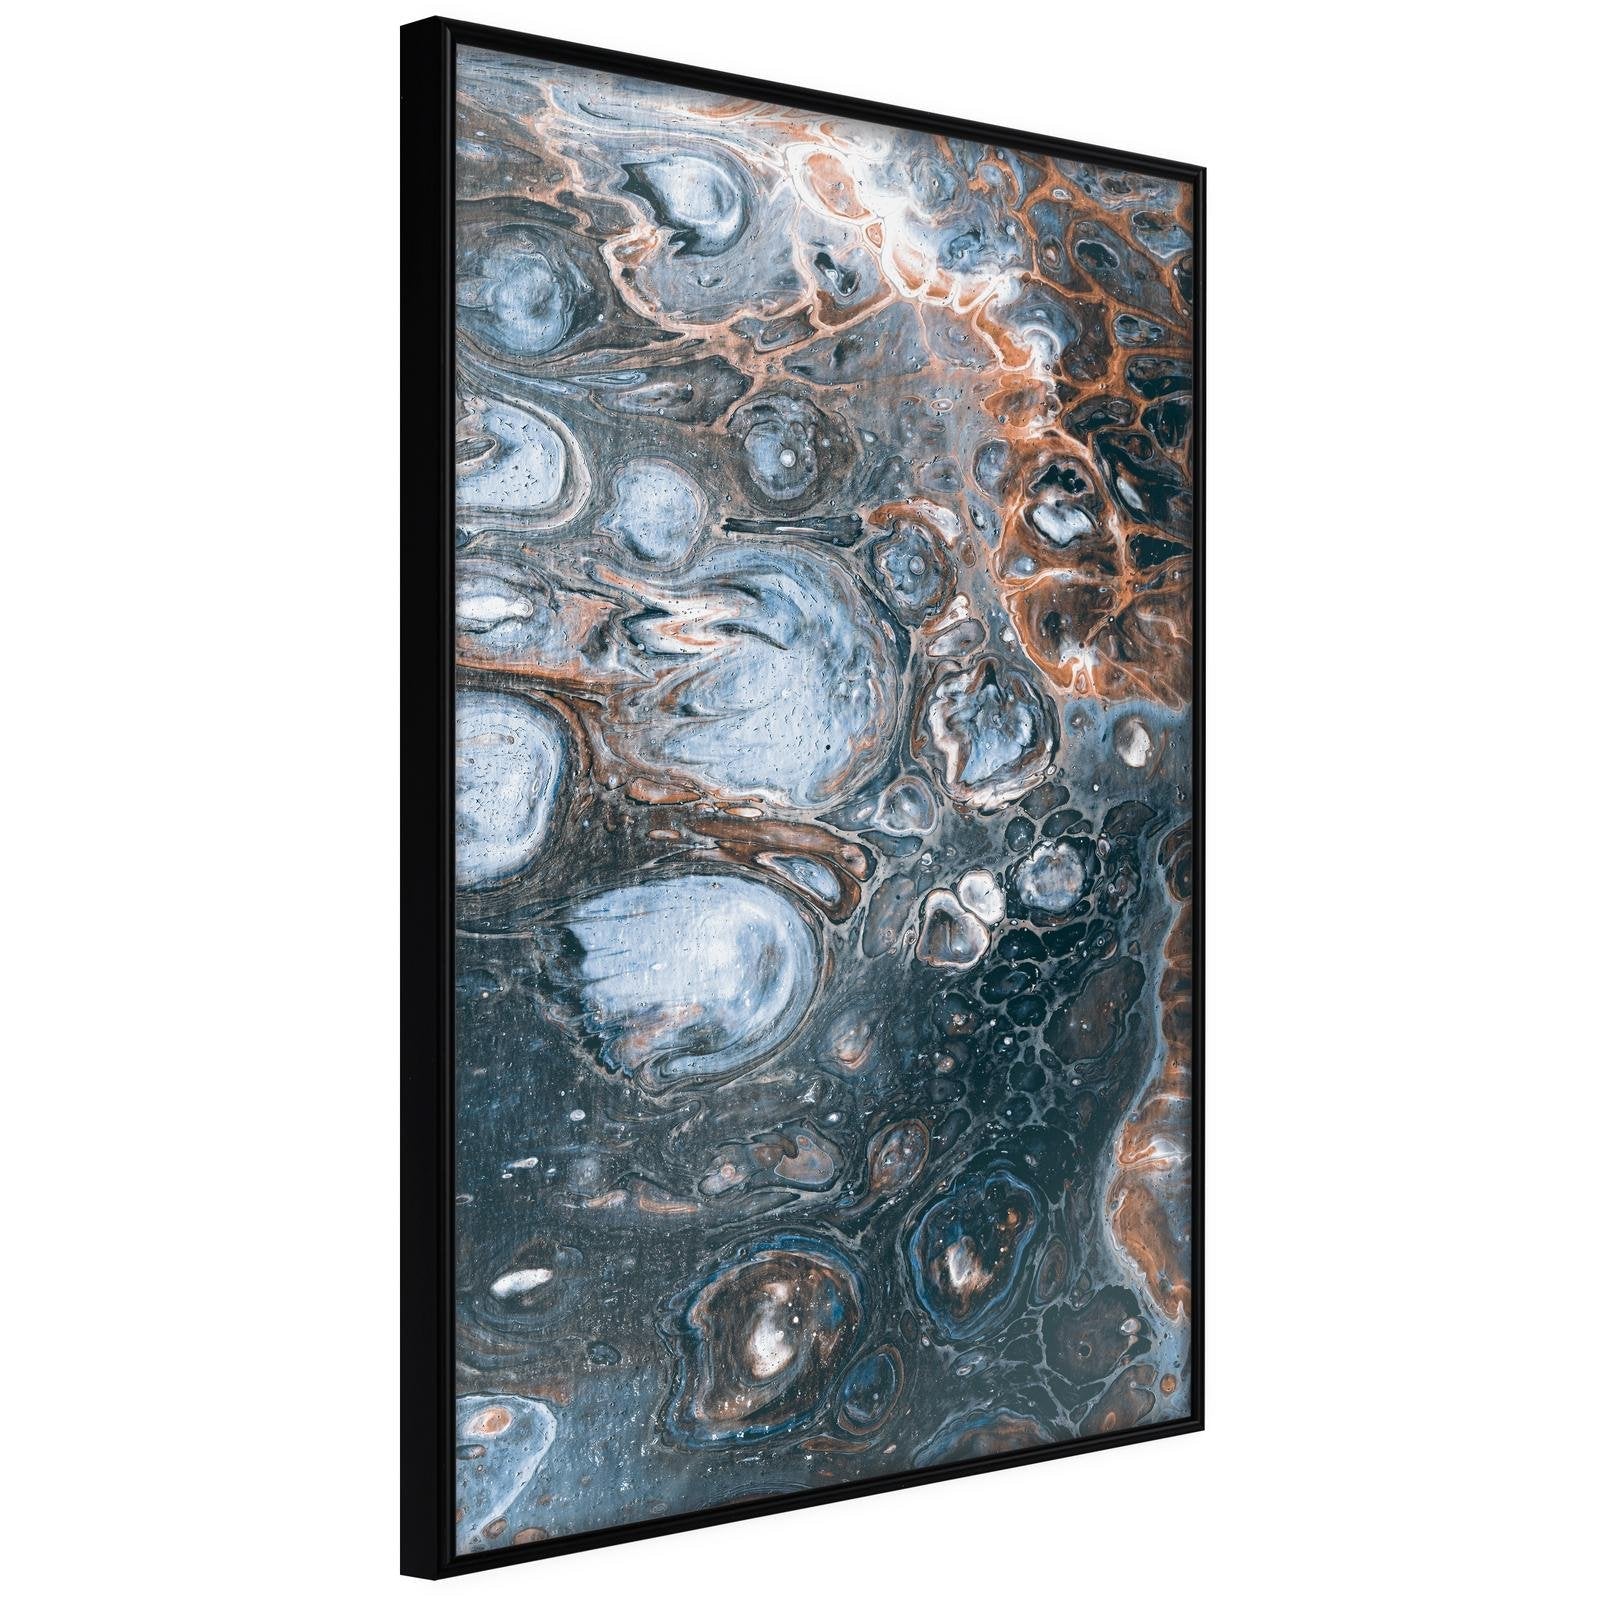 Inramad Poster / Tavla - Surface of the Unknown Planet I - 30x45 Svart ram